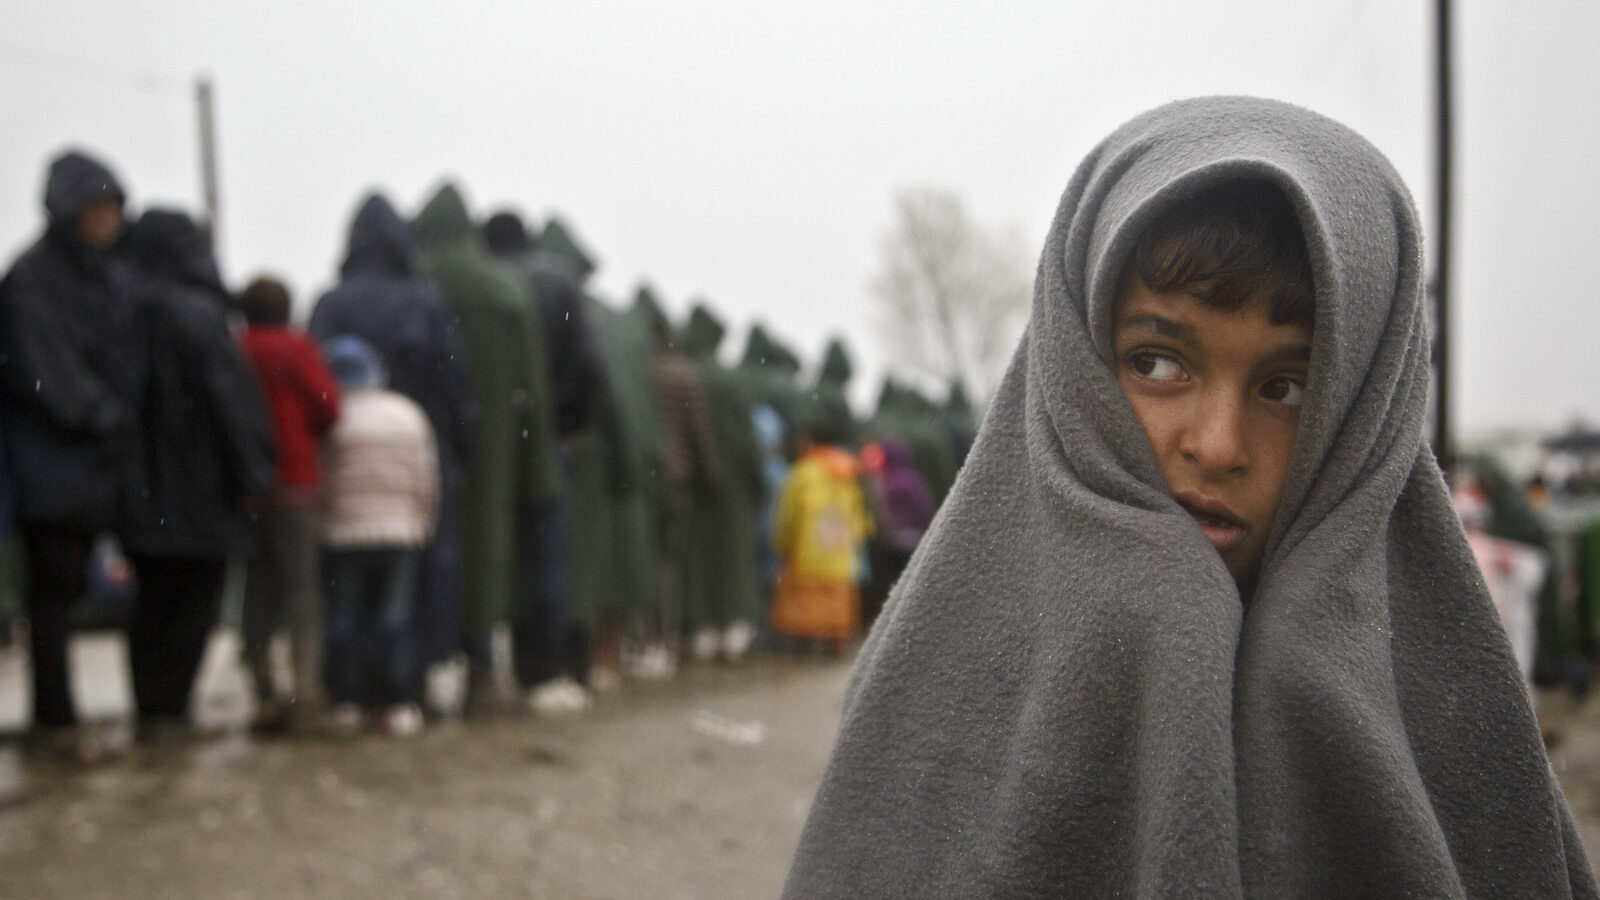 Migrant child covered in blanket stands in rain at the Greek border camp near Idomeni, Thursday, March 10, 2016. Northbound borders are closed and authorities plan to distribute fliers telling refugees seeking to reach central Europe that there is no hope of you continuing north, therefore come to the camps where we can provide assistance as more than 36,000 transient migrants are thought to be stuck in financially struggling Greece. (AP Photo/Visar Kryeziu)